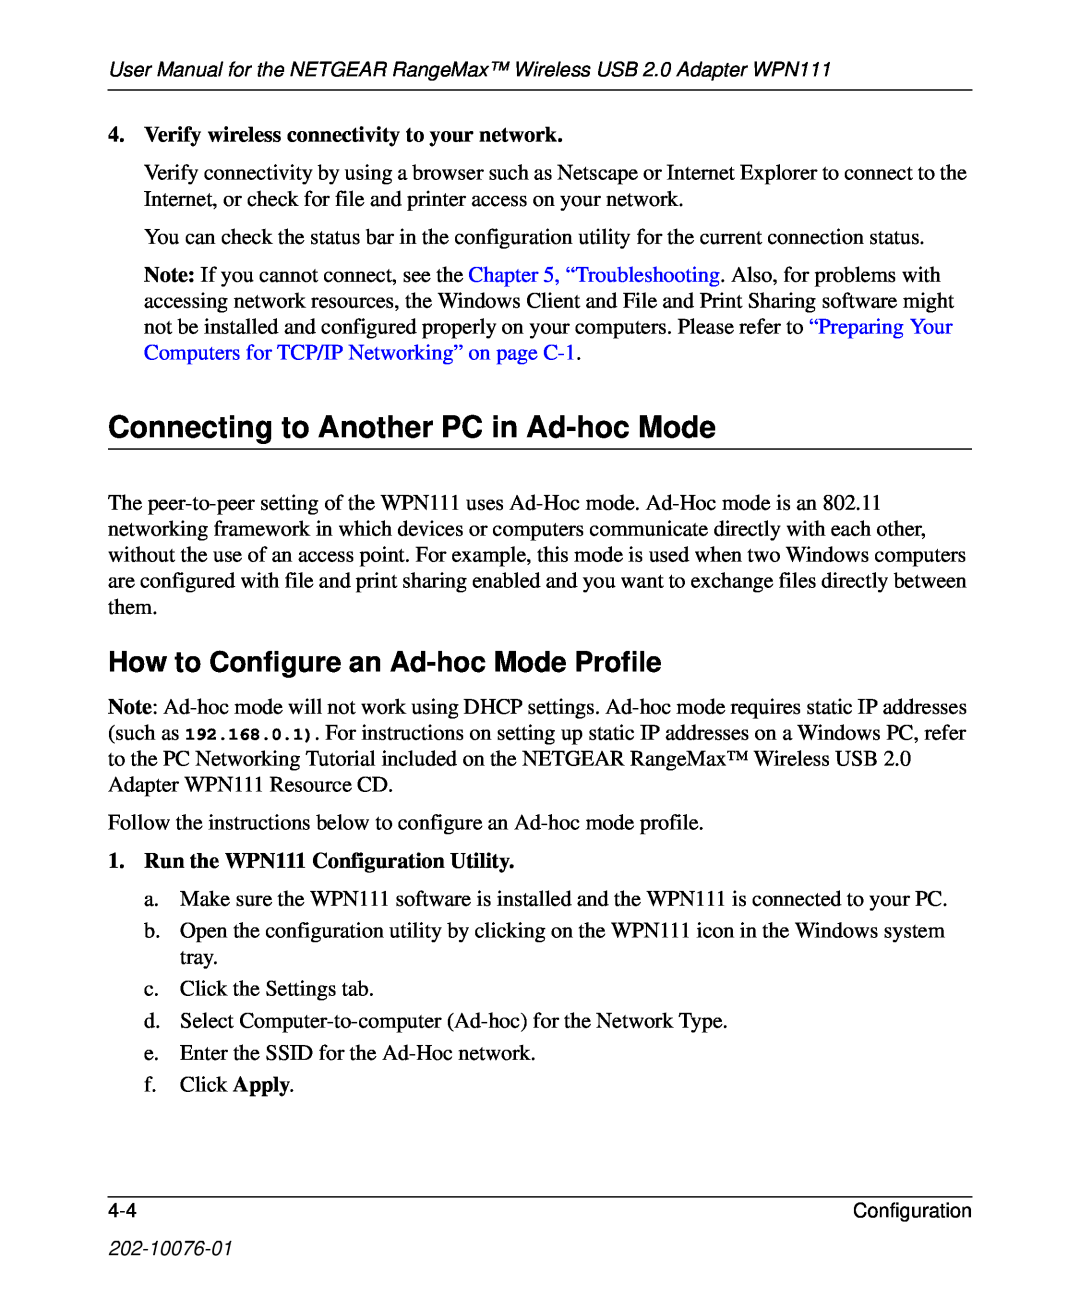 NETGEAR WPN111 user manual Connecting to Another PC in Ad-hoc Mode, How to Configure an Ad-hoc Mode Profile 